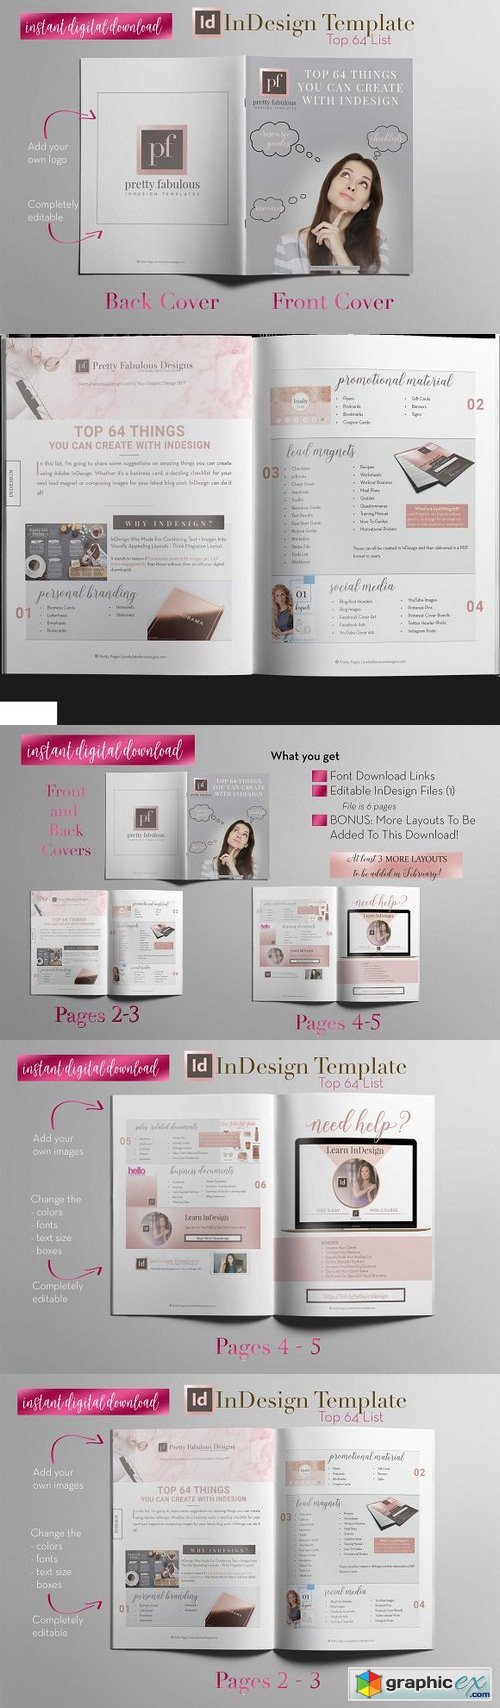 Lead Magnet List | InDesign Template